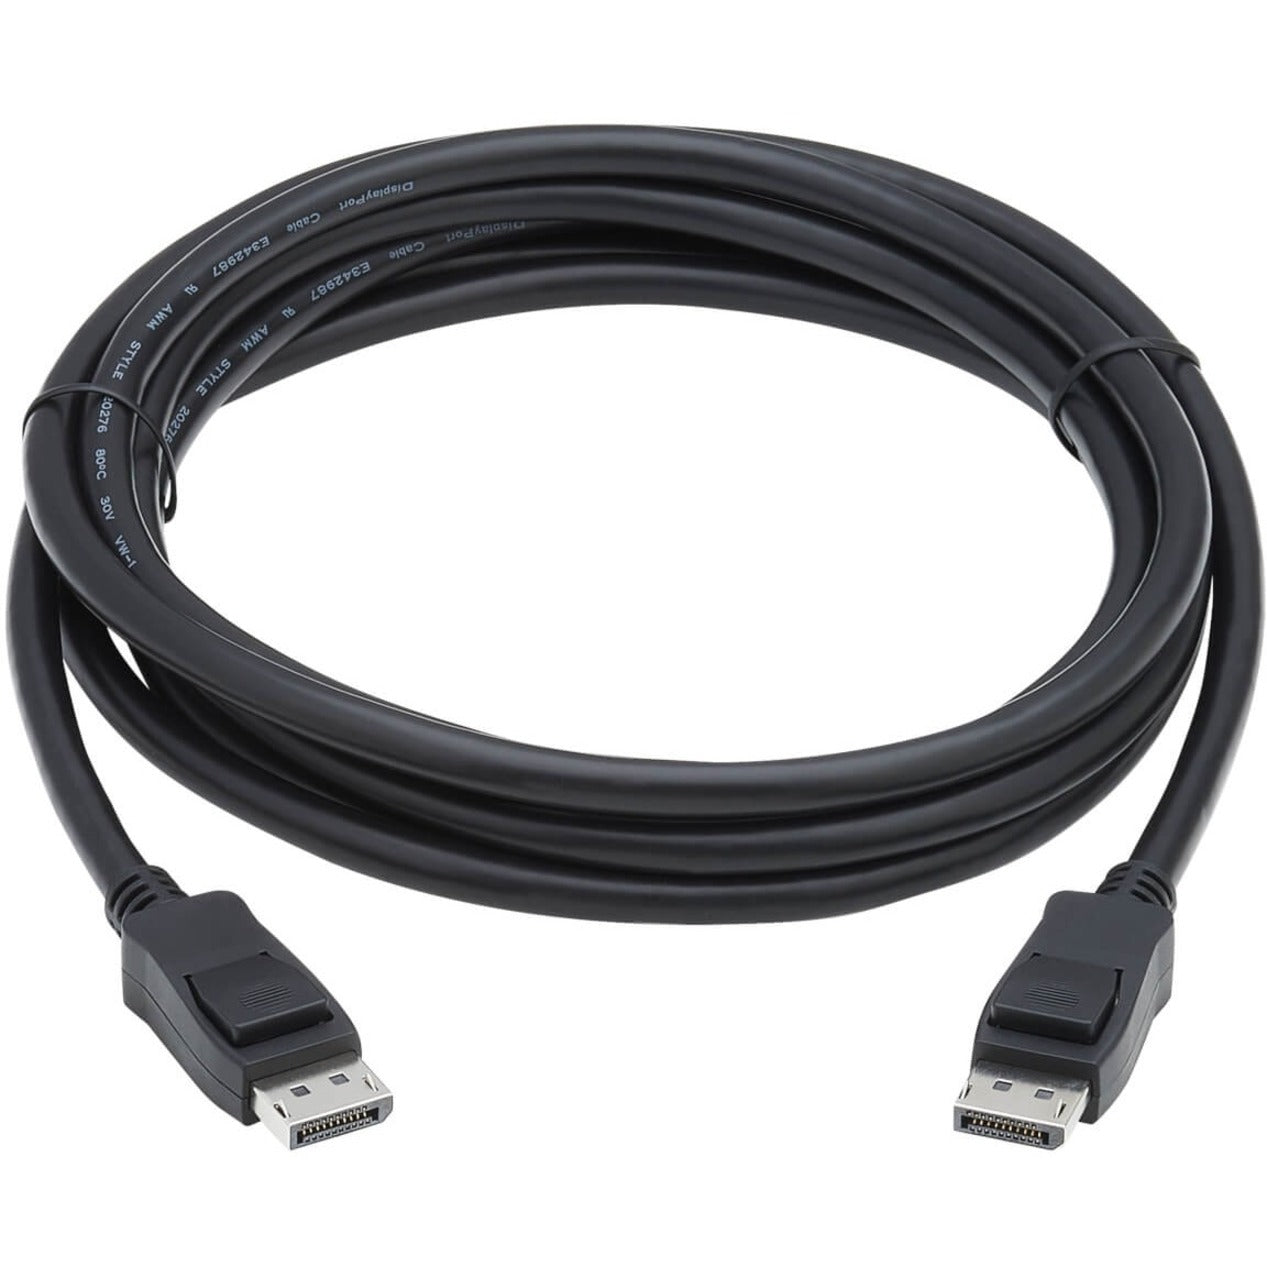 Tripp Lite P580-010-V4 DisplayPort A/V Cable, 10 ft, Plug & Play, 32 Gbit/s Data Transfer Rate, 7680 x 4320 Supported Resolution